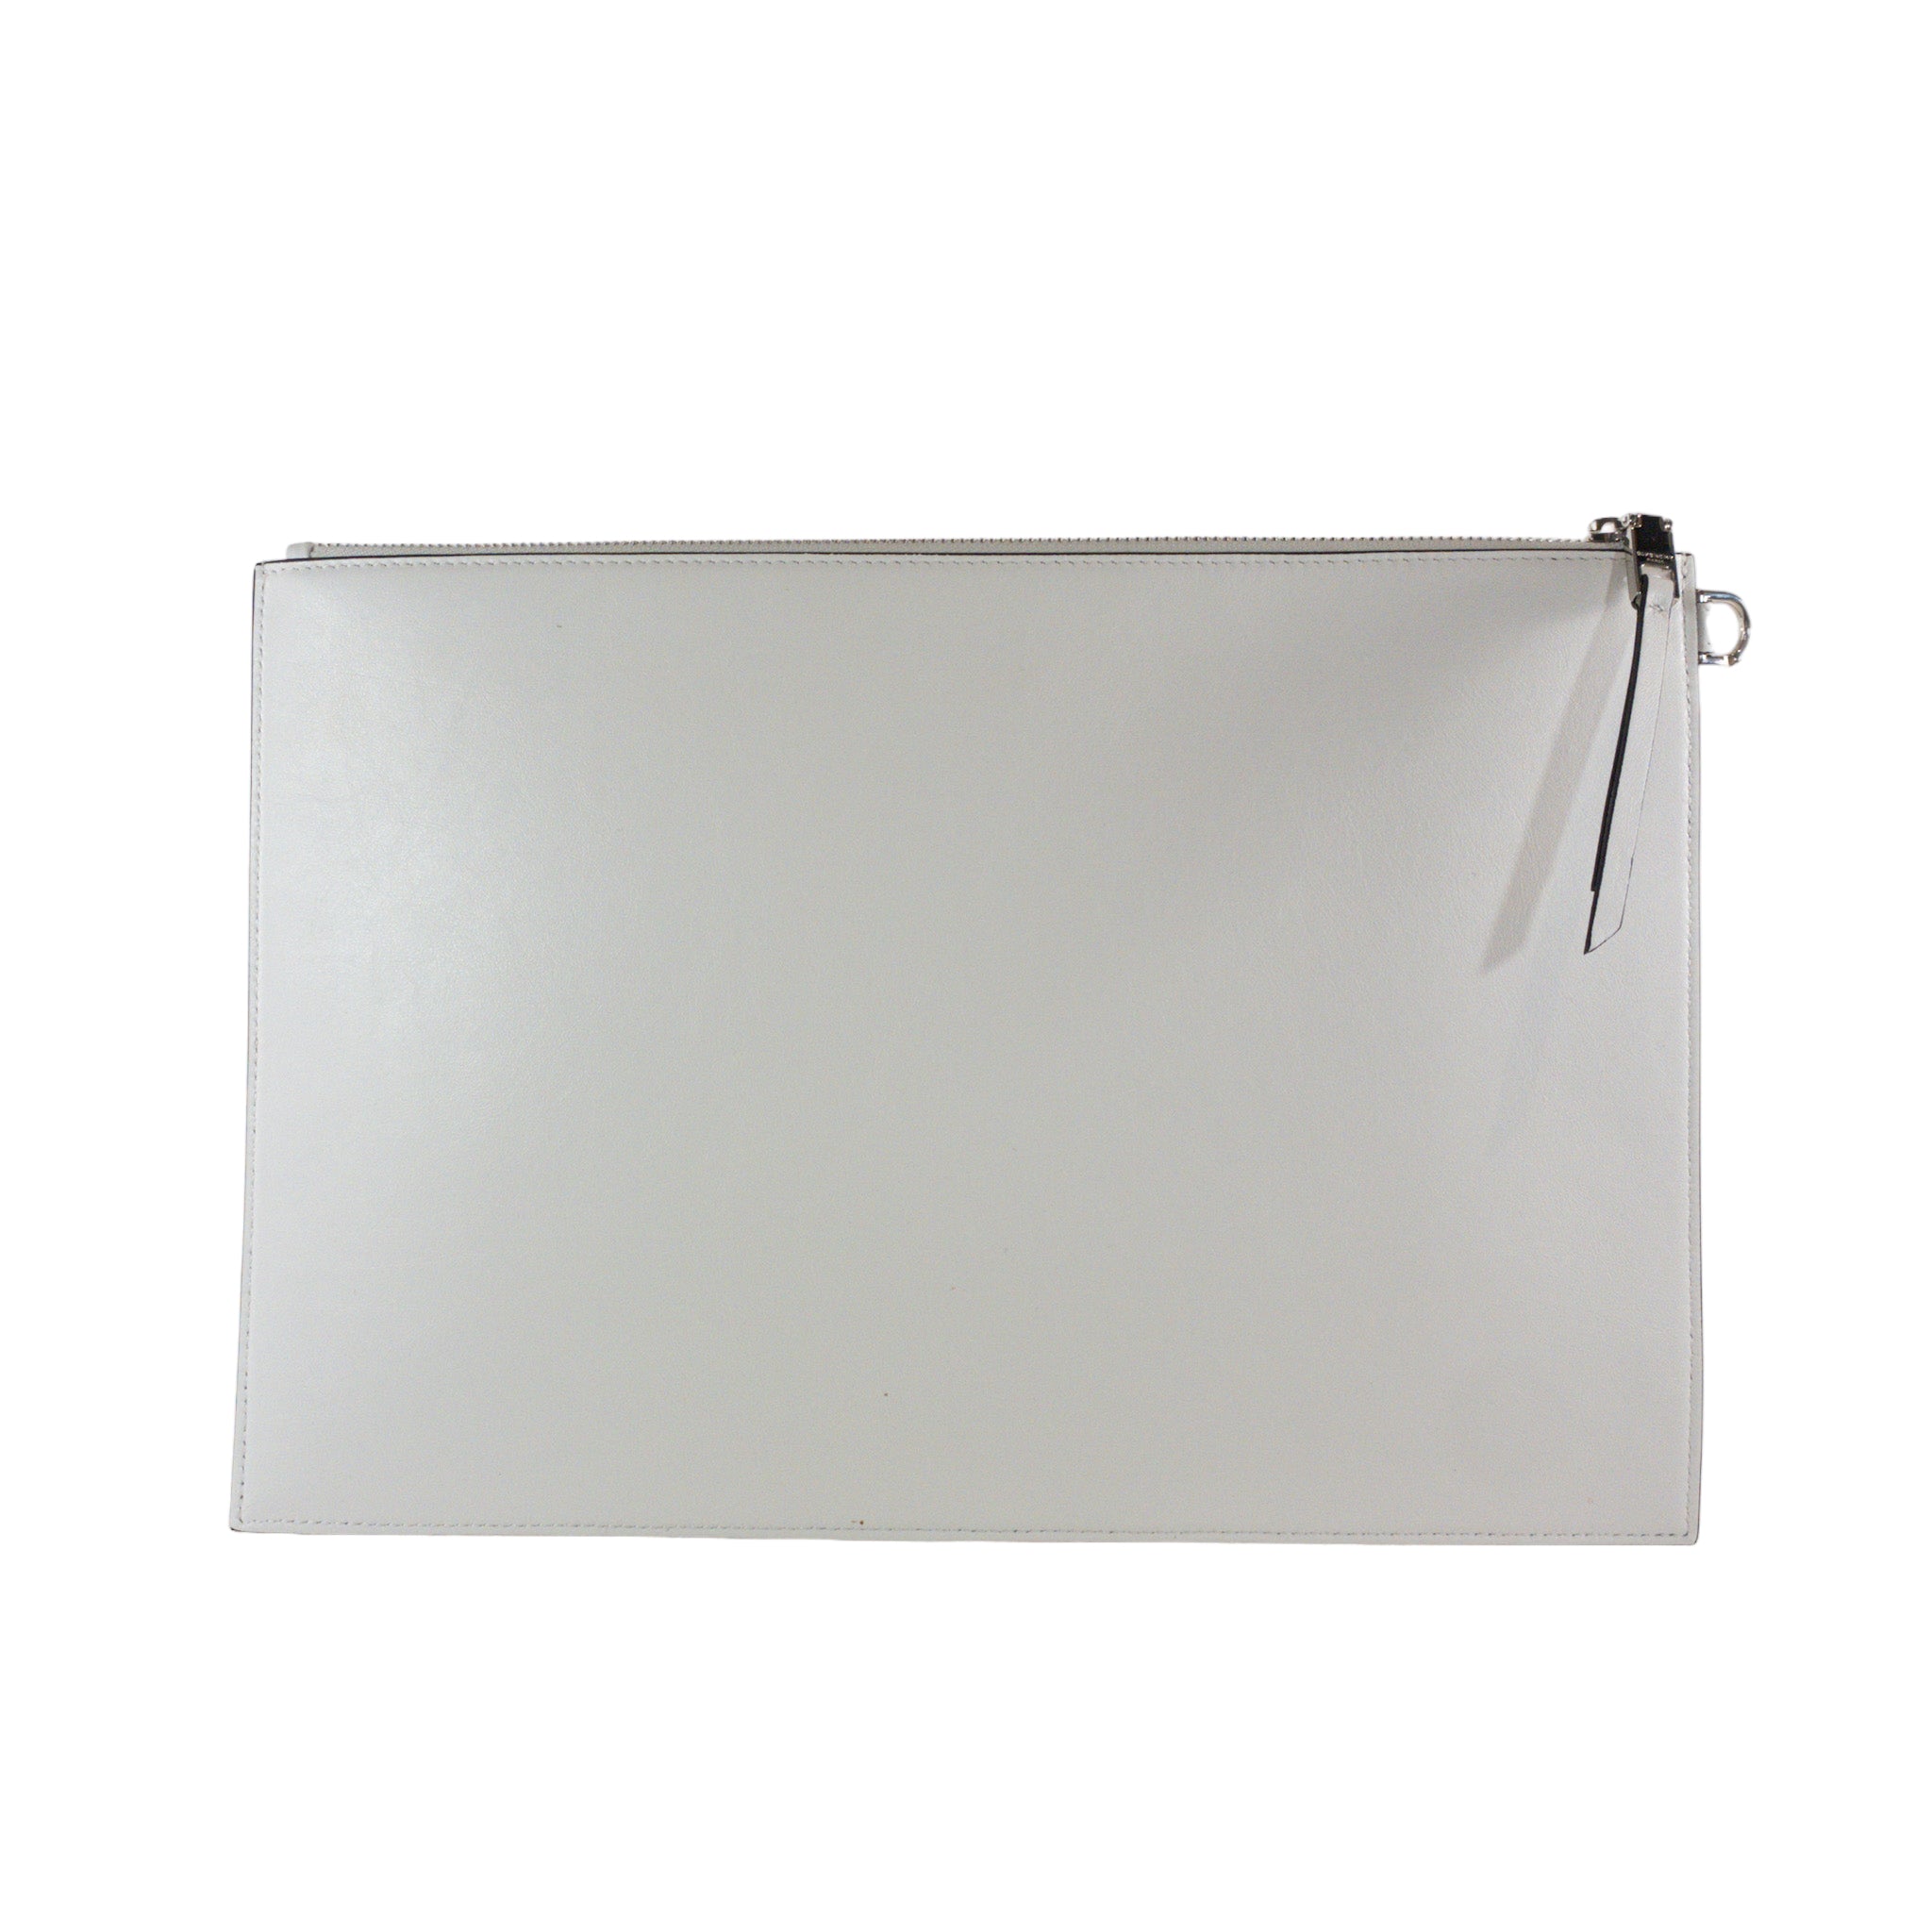 Givenchy White Leather Clutch